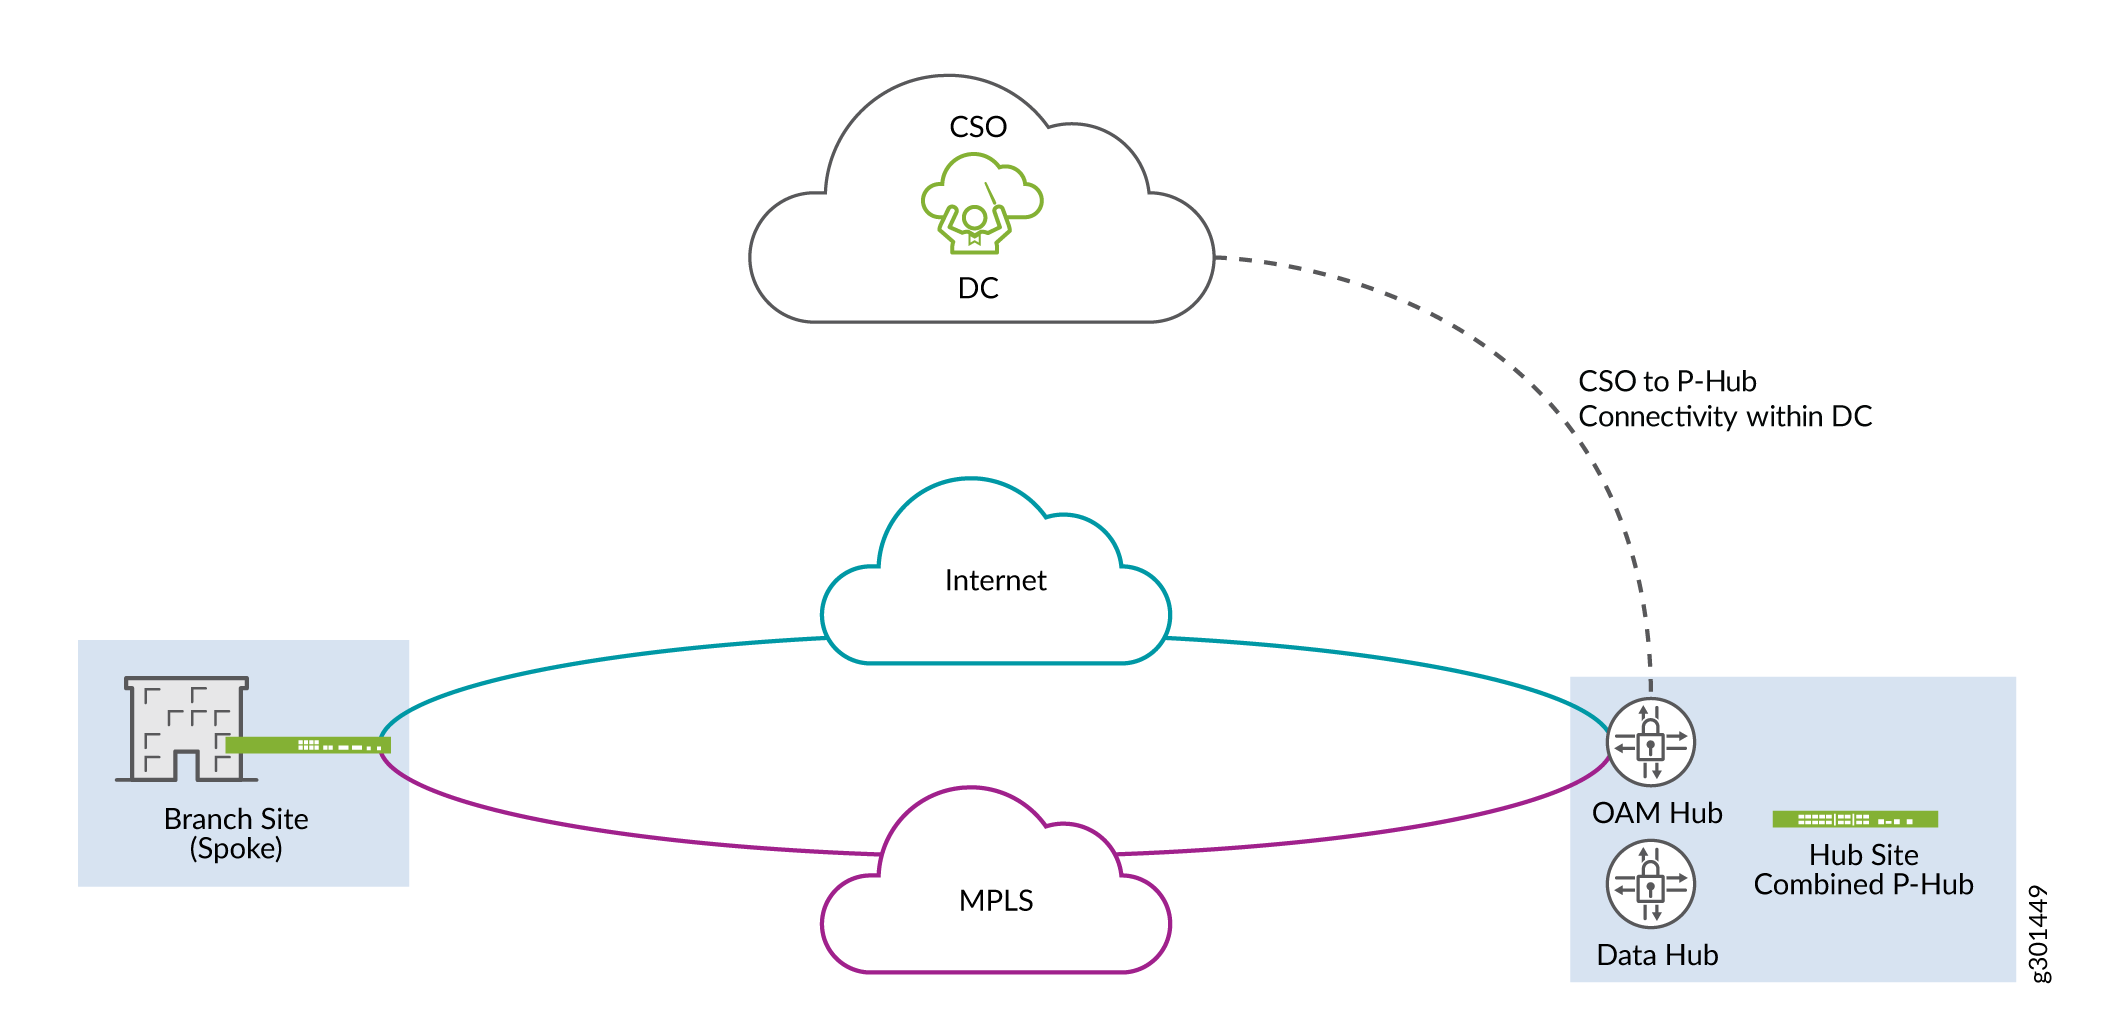 Simplified CSO SD-WAN
Topology (On-Premises Deployment in which CSO is Connected to Provider
Hubs within a Customer’s Private Data Center)